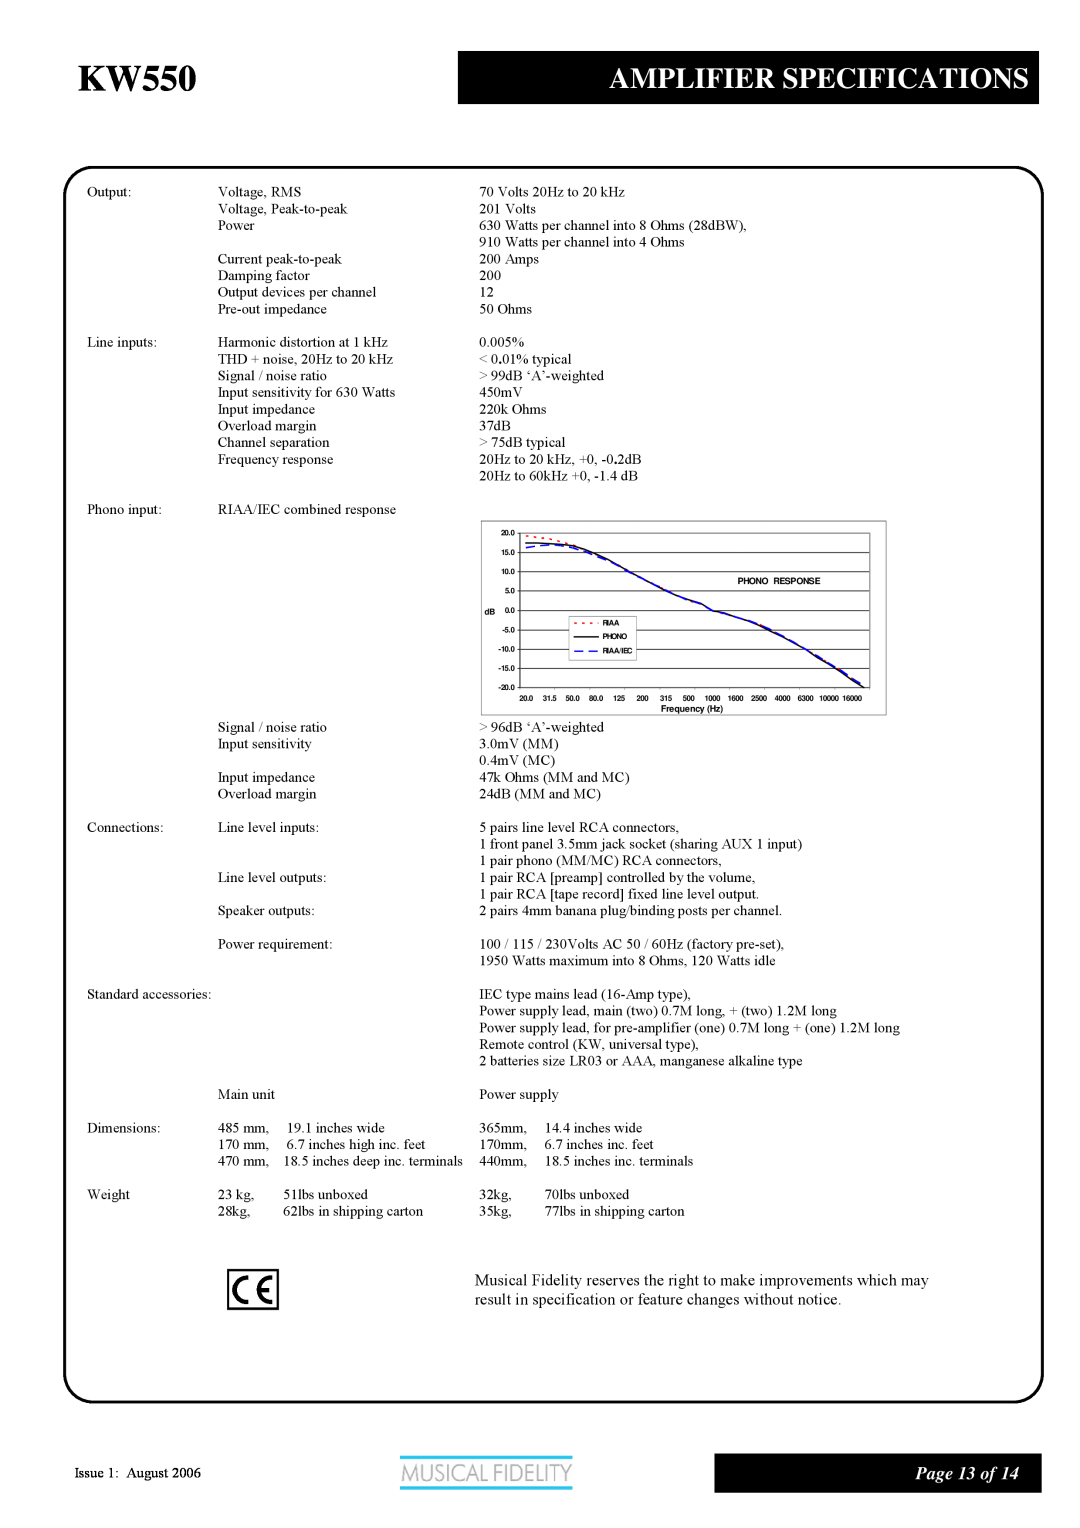 Musical Fidelity KW550 manual Amplifier Specifications, Page 13 of 